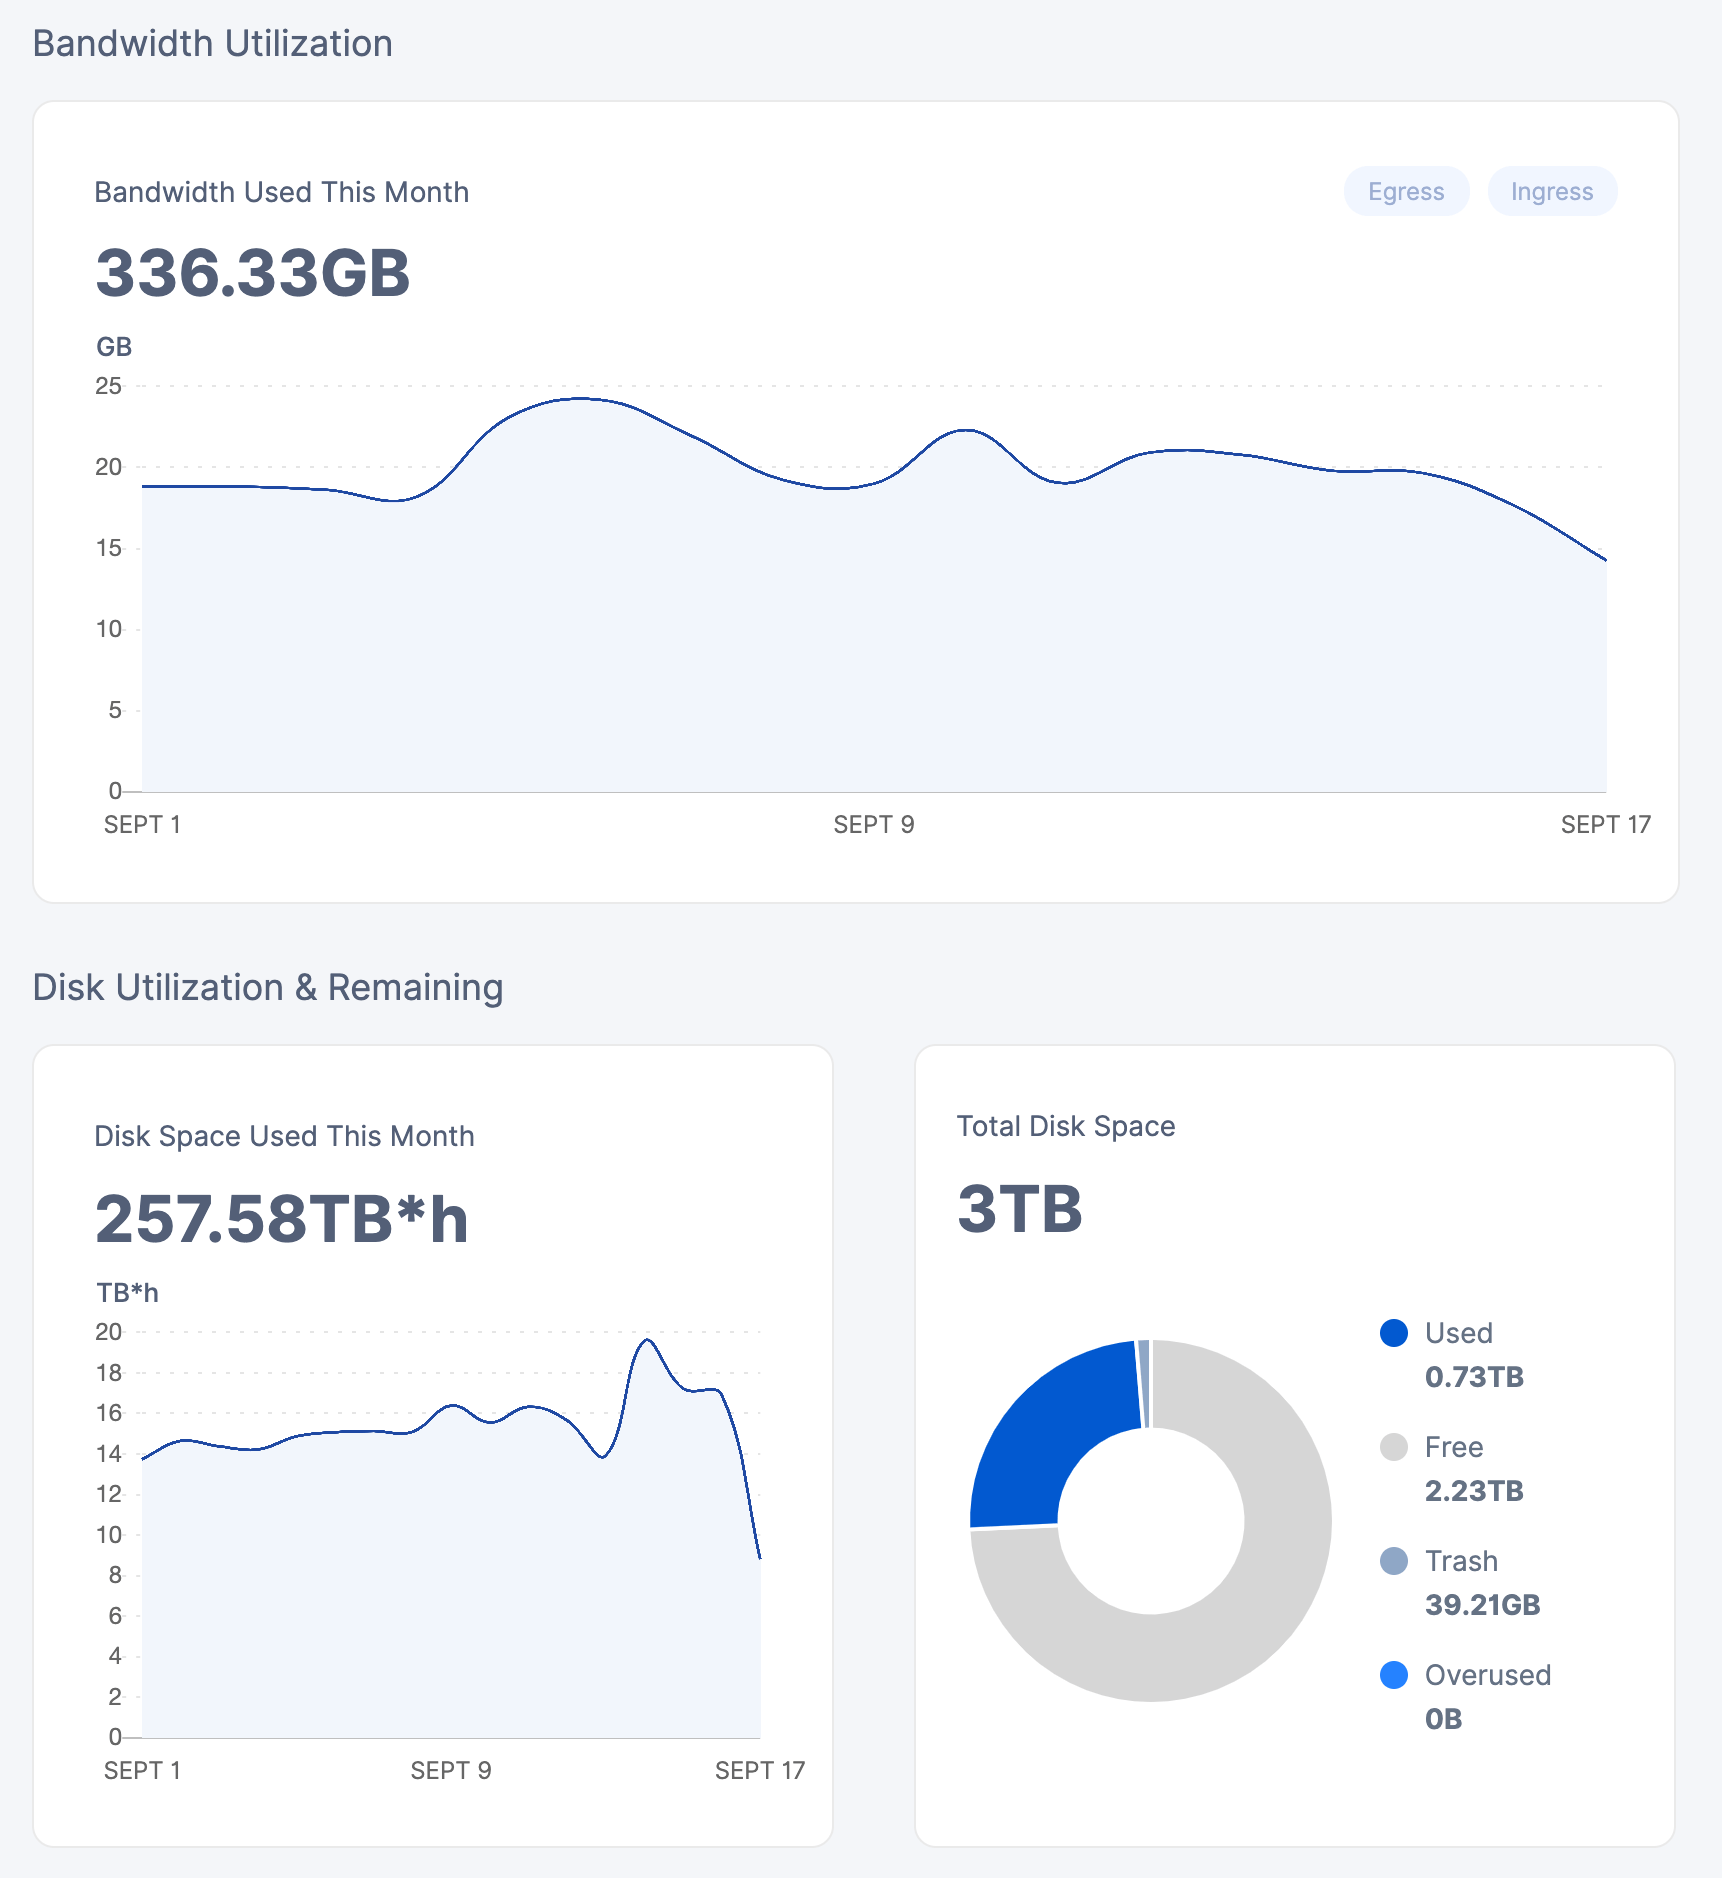 Screenshot of the dashboard of my personal Storj node. The image shows 3 diagrams. Diagram 1: Data traffic history of upload and download- from September 1 to September 17, 2021. Per day, the data traffic is about 20 GB. Diagram 2: Shows the used storage space in TB*h per day and in total. In September, a total of 257.58 TB*h was used. Diagram 3: Shows the used storage on the medium. A total of 3 TB is available. Of this, 0.73 TB was used for data and 39.21 GB is in the recycle bin.